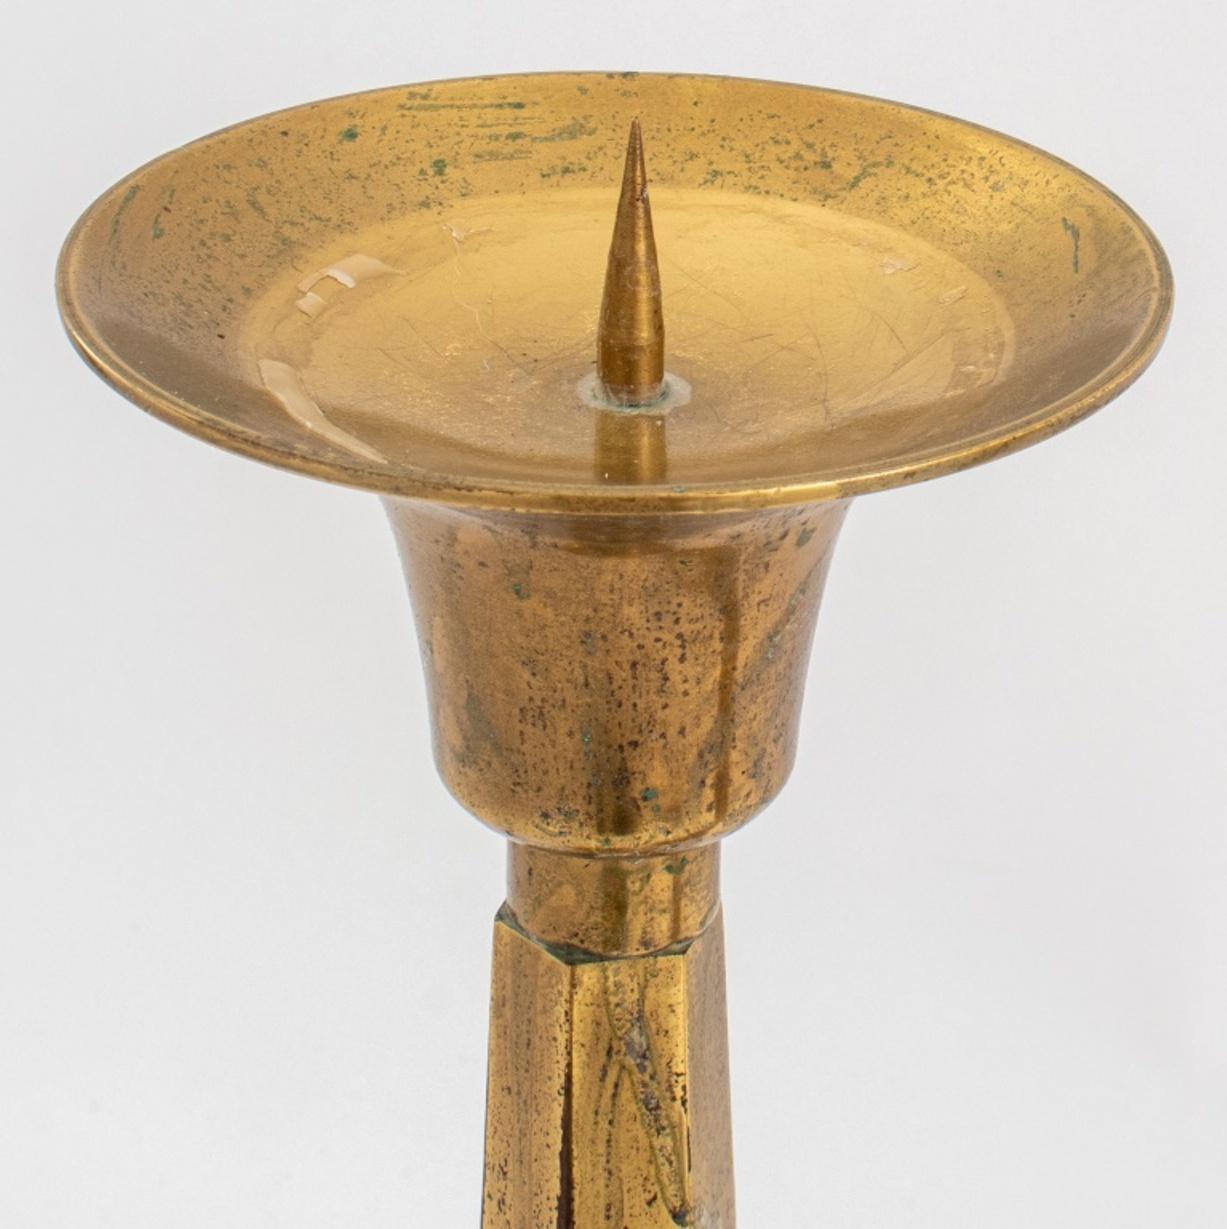 Pair of hexagonal columnar brass pricket sticks on circular bases, each with round drip pans above shaped hexagonal uprights. 

Dimensions: 16